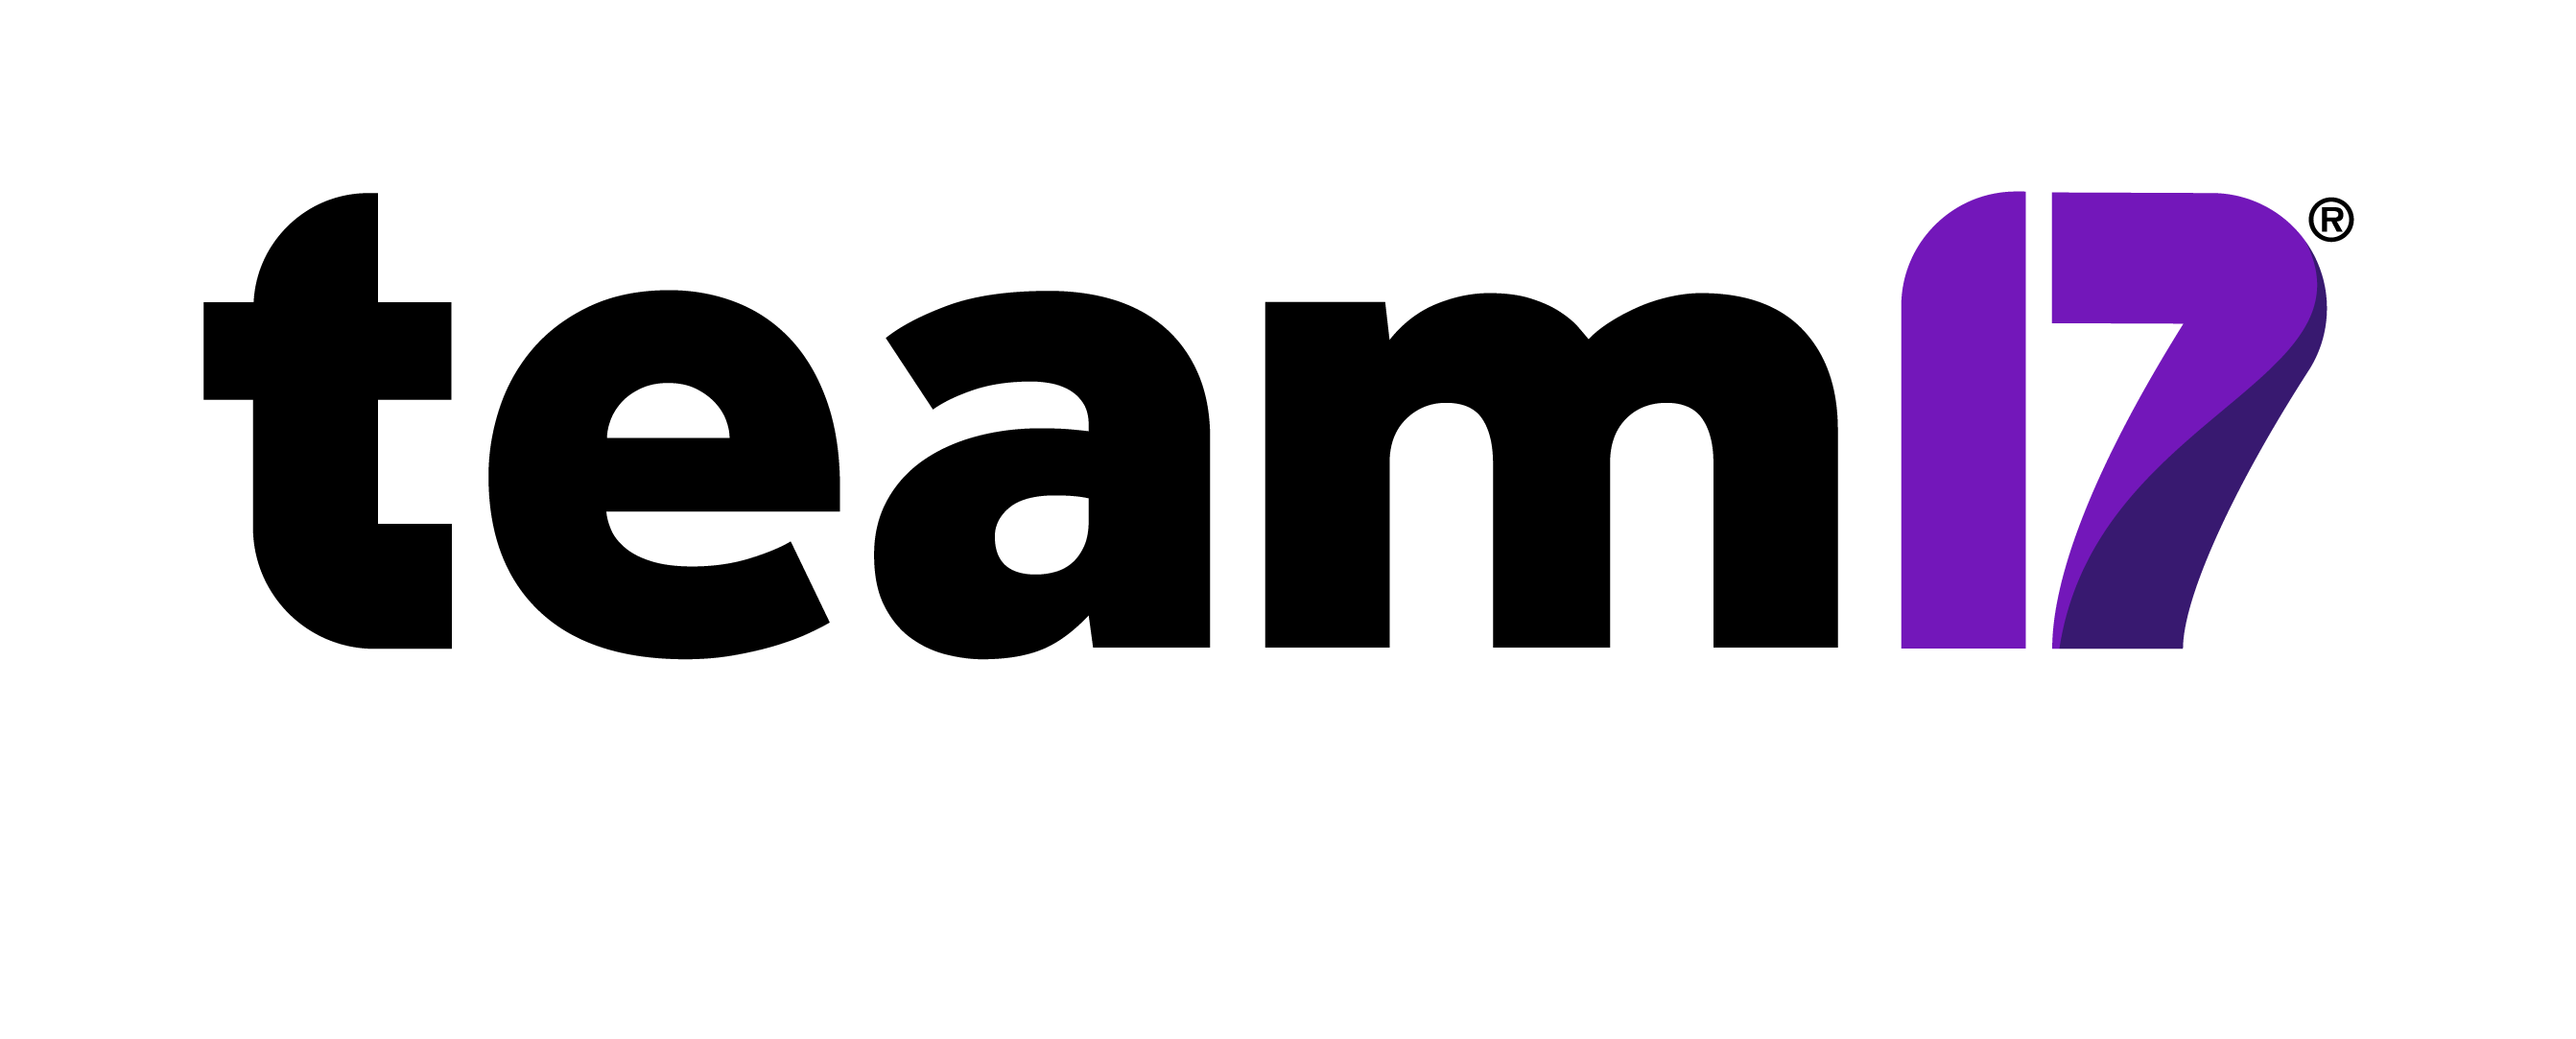 Team17 Award Winning Indie Games Developed By Independent Developers